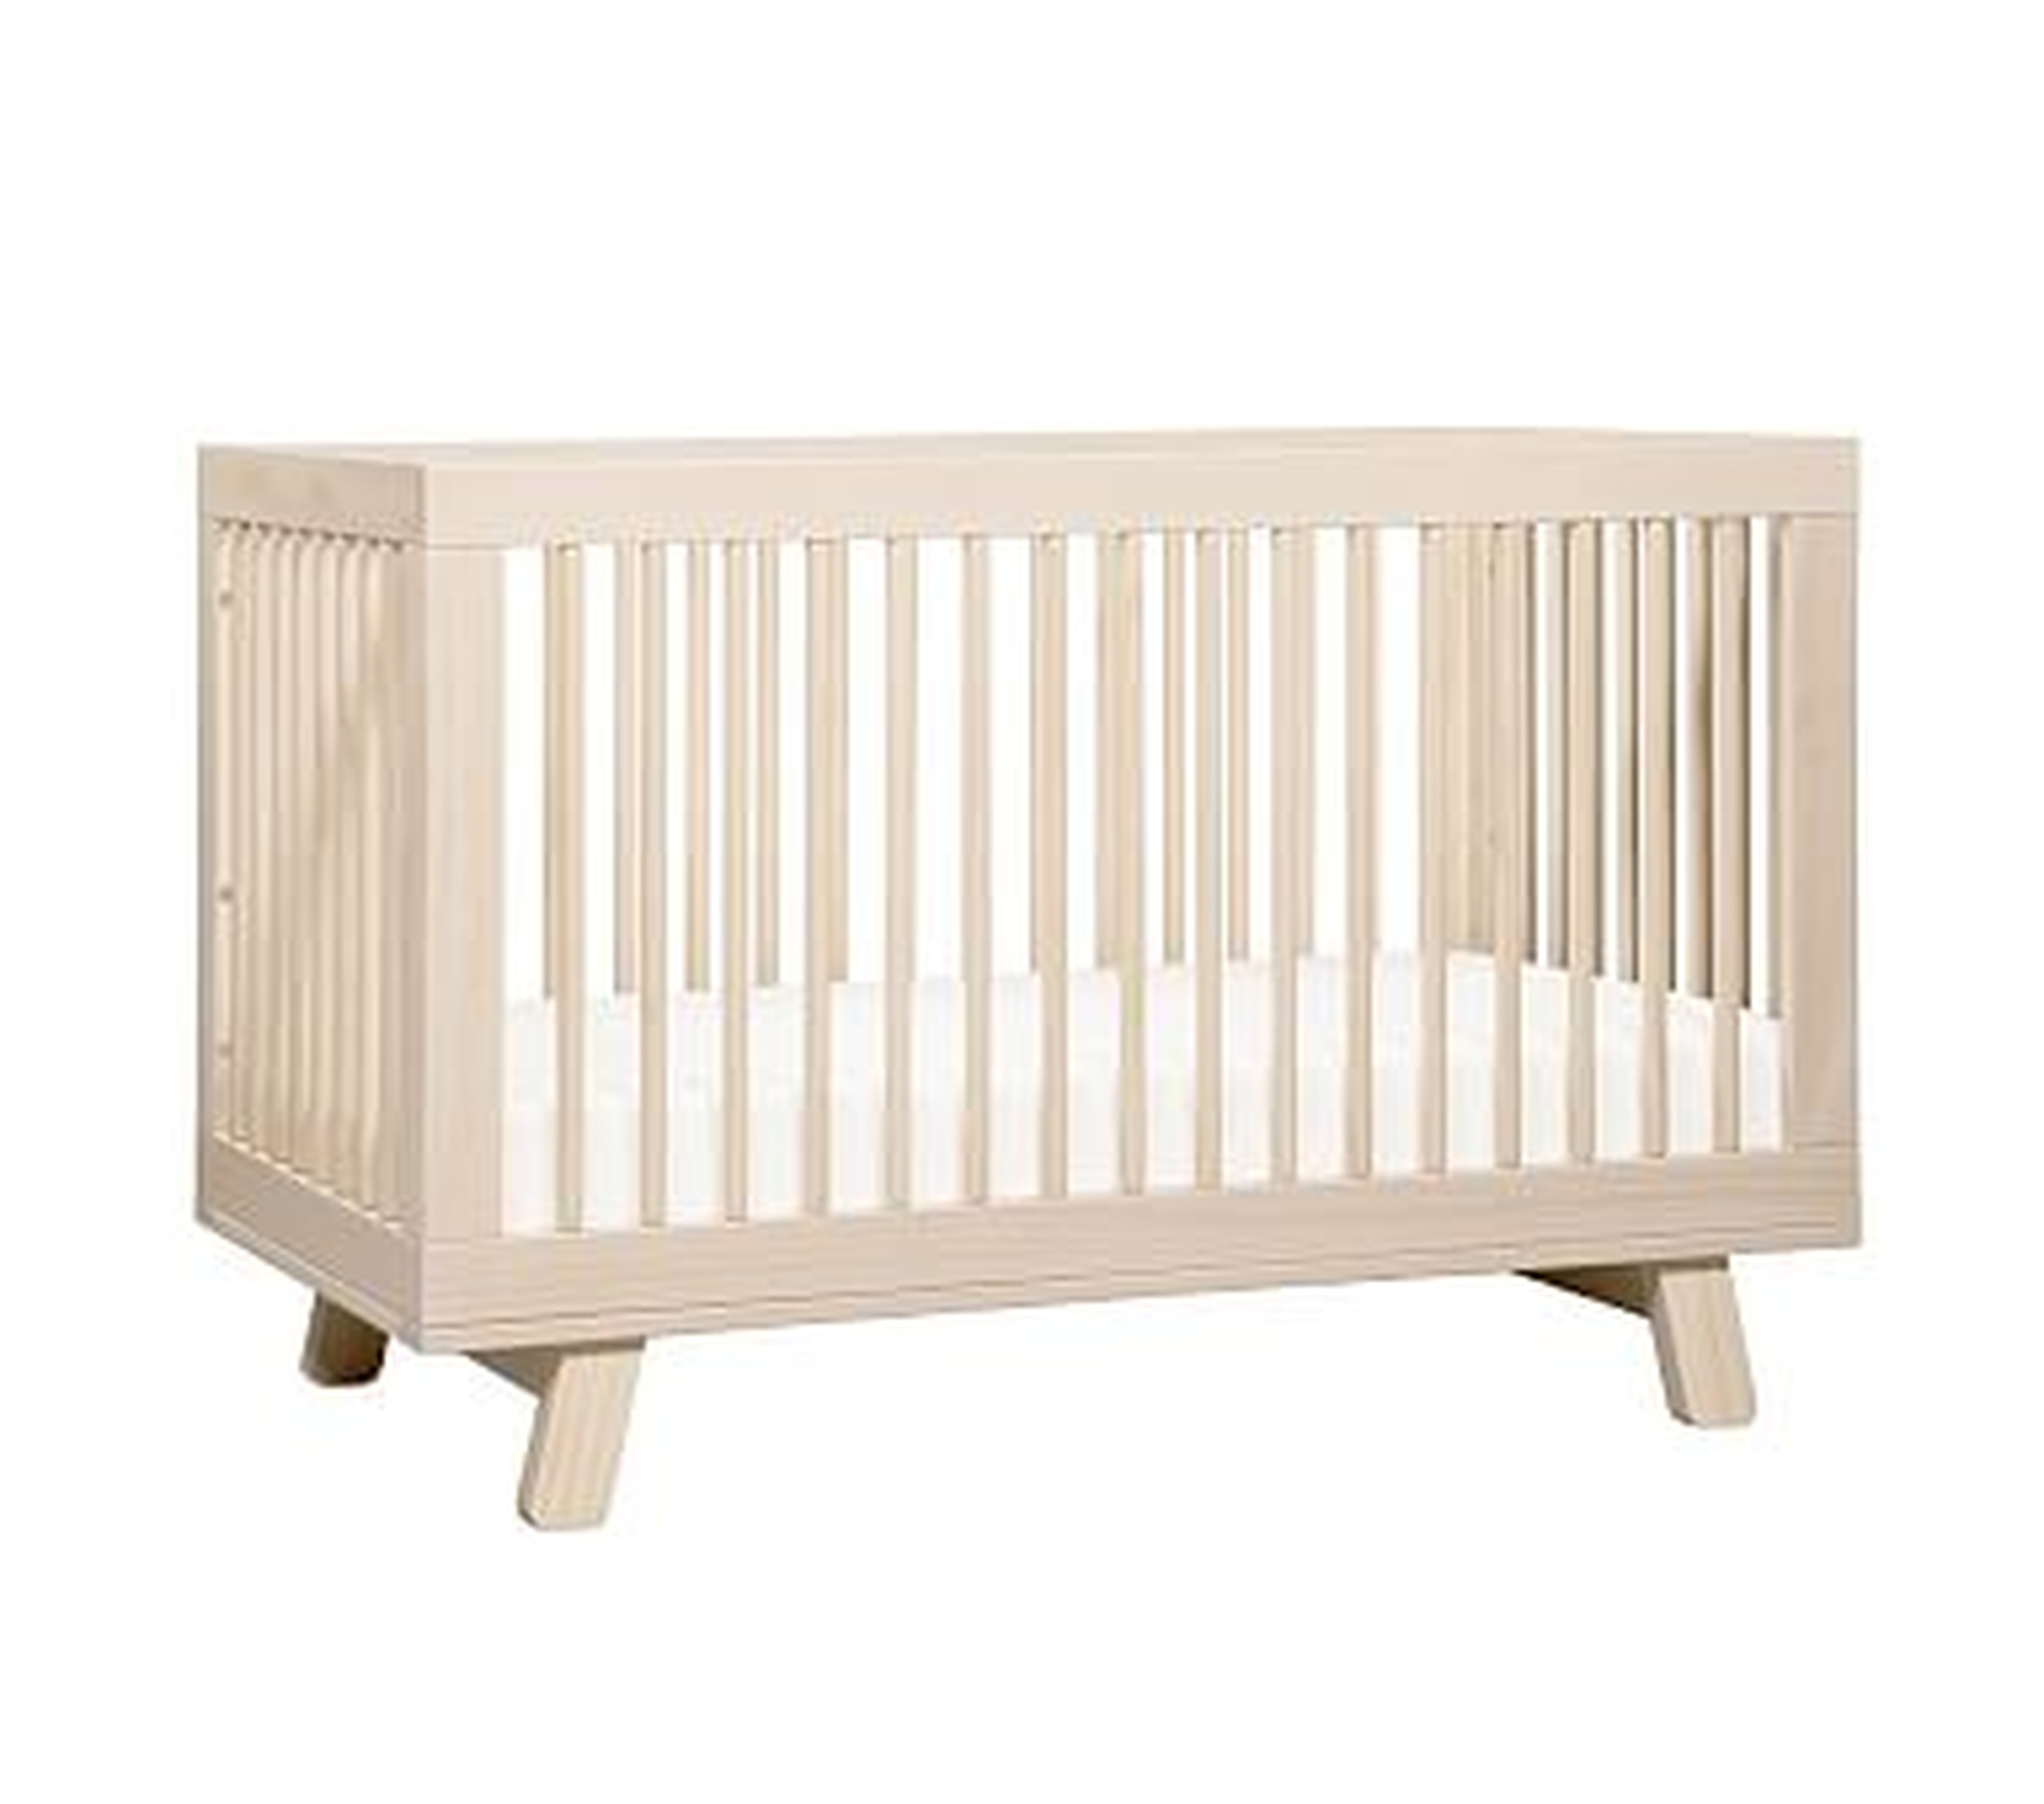 Babyletto Hudson Convertible, Washed Natural, Standard UPS Delivery - Pottery Barn Kids